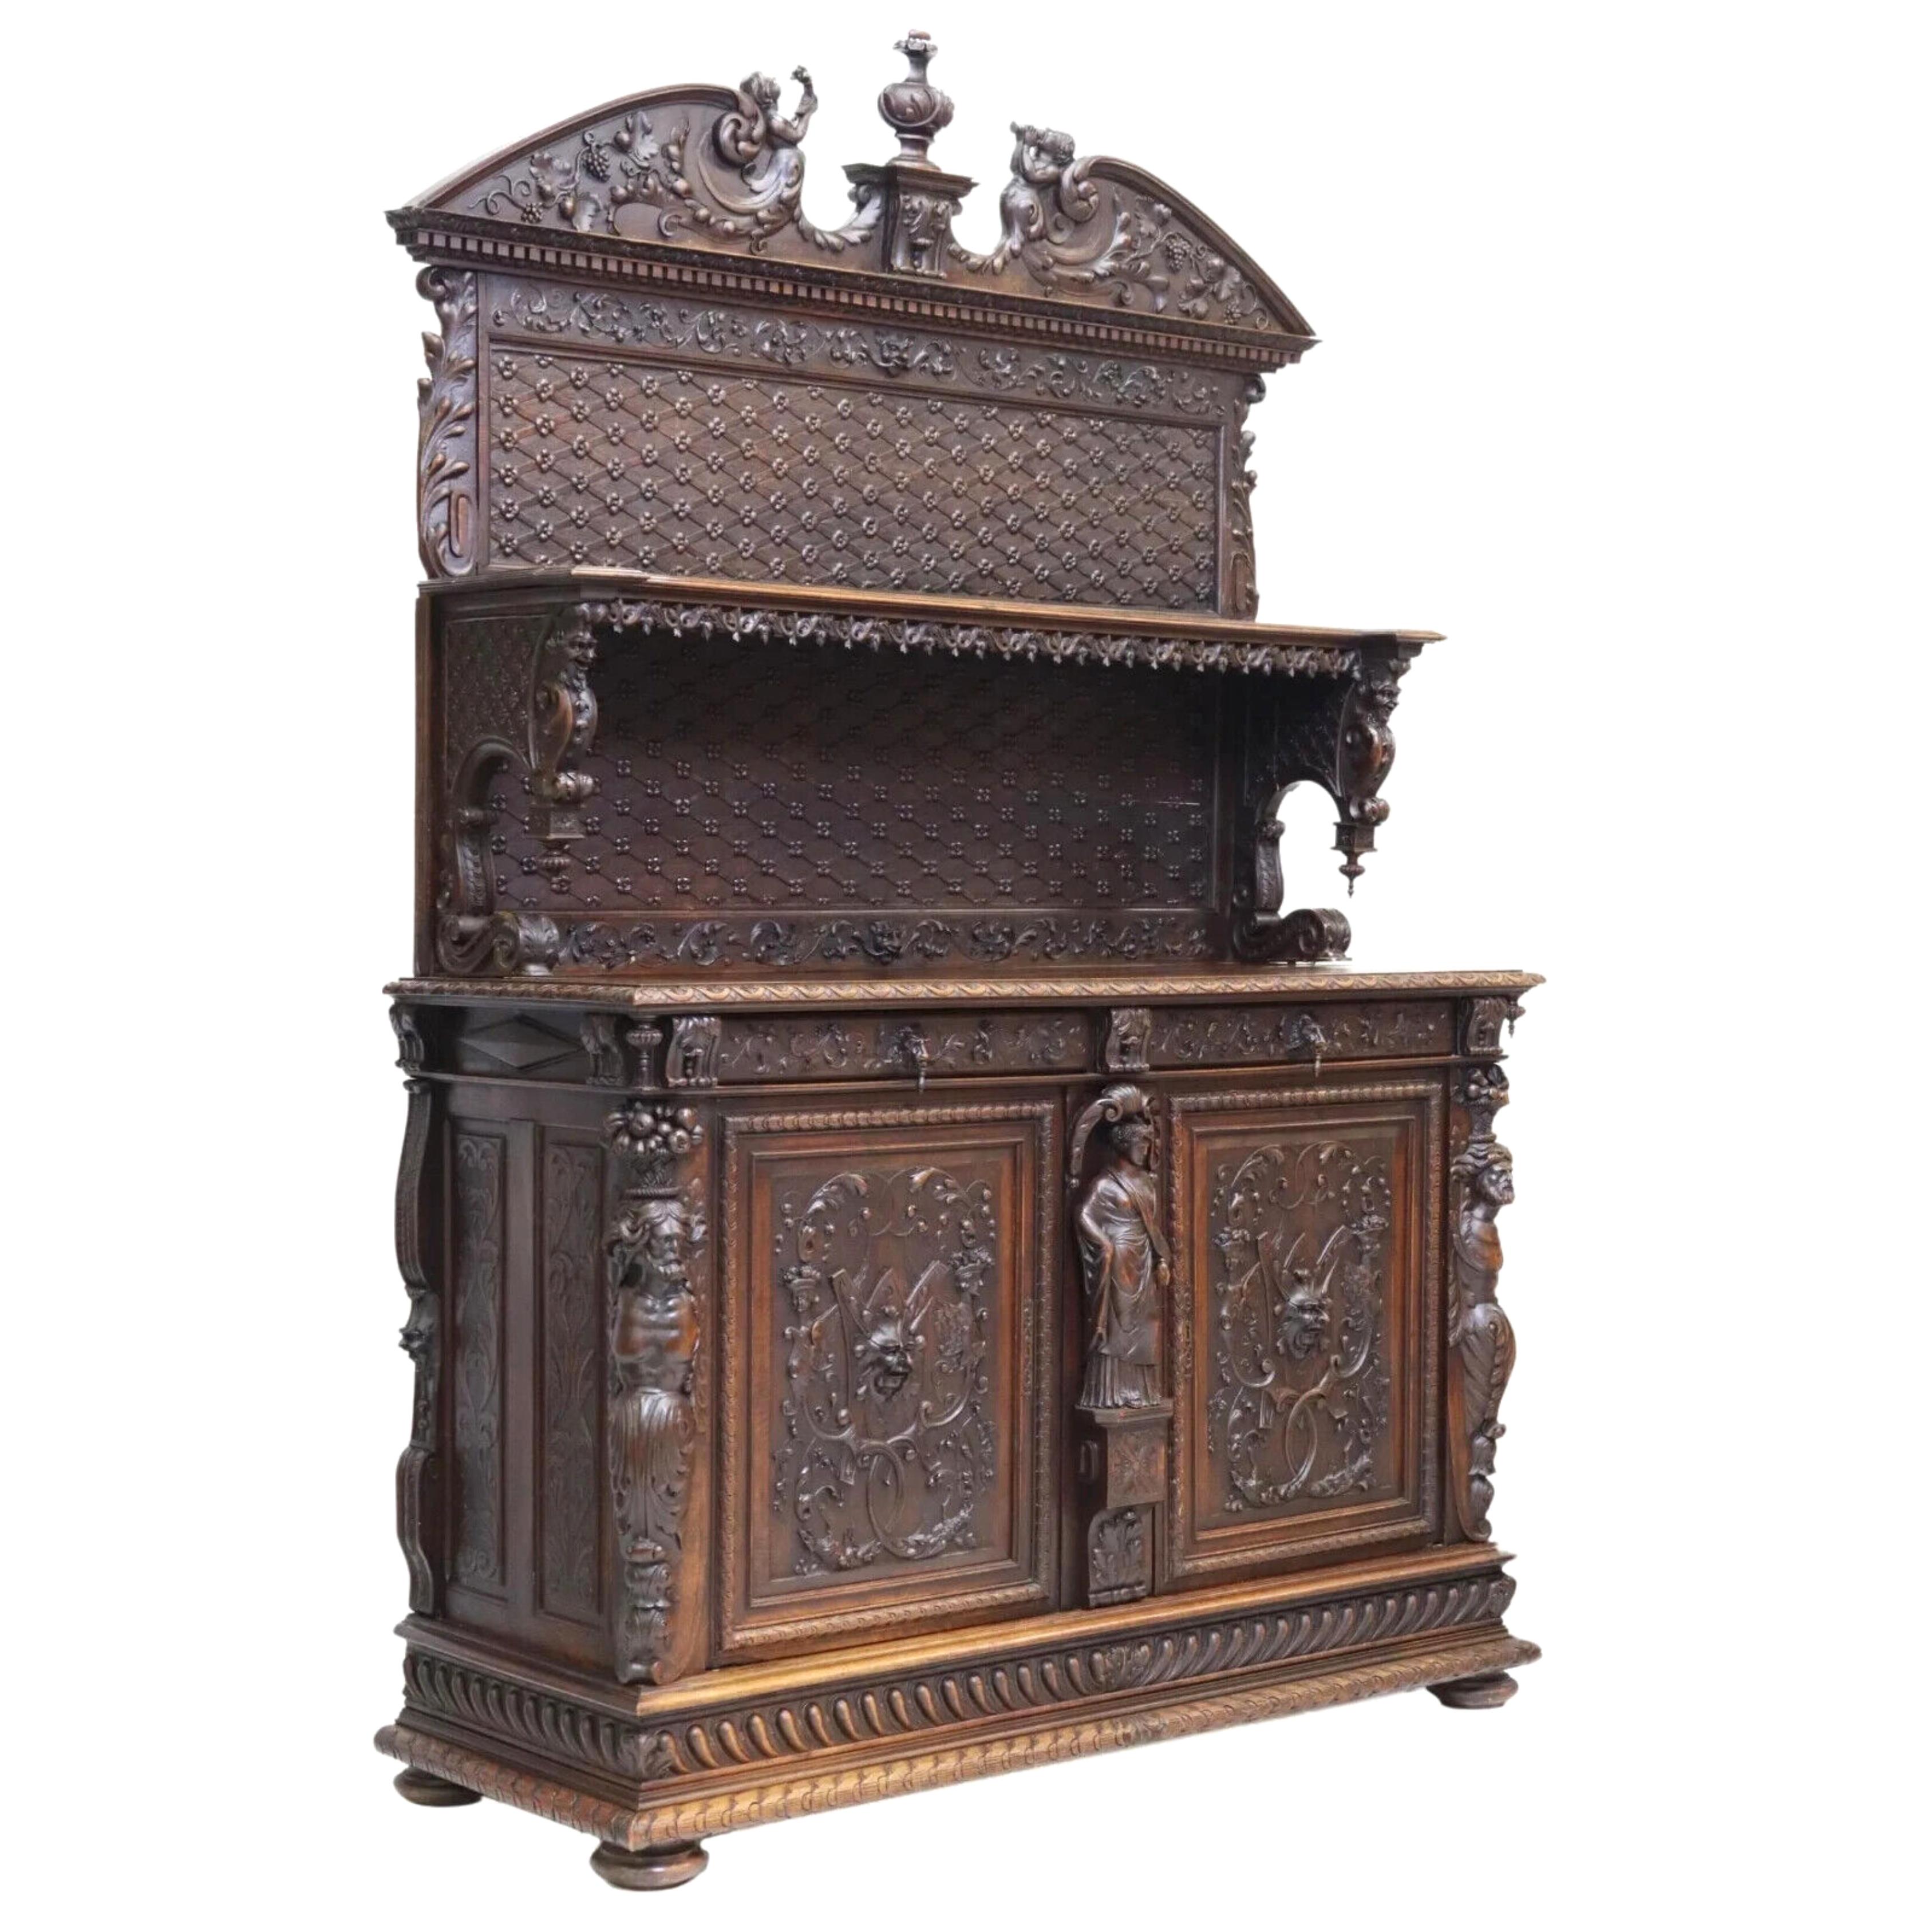 
Gorgeous Antique Sideboard, French Renaissance Revival,  Carved, 19th Century,  1800s!  

This antique sideboard is a stunning piece that will elevate any space with its intricate carvings and dark wood tones. With a length of 64 inches, a height